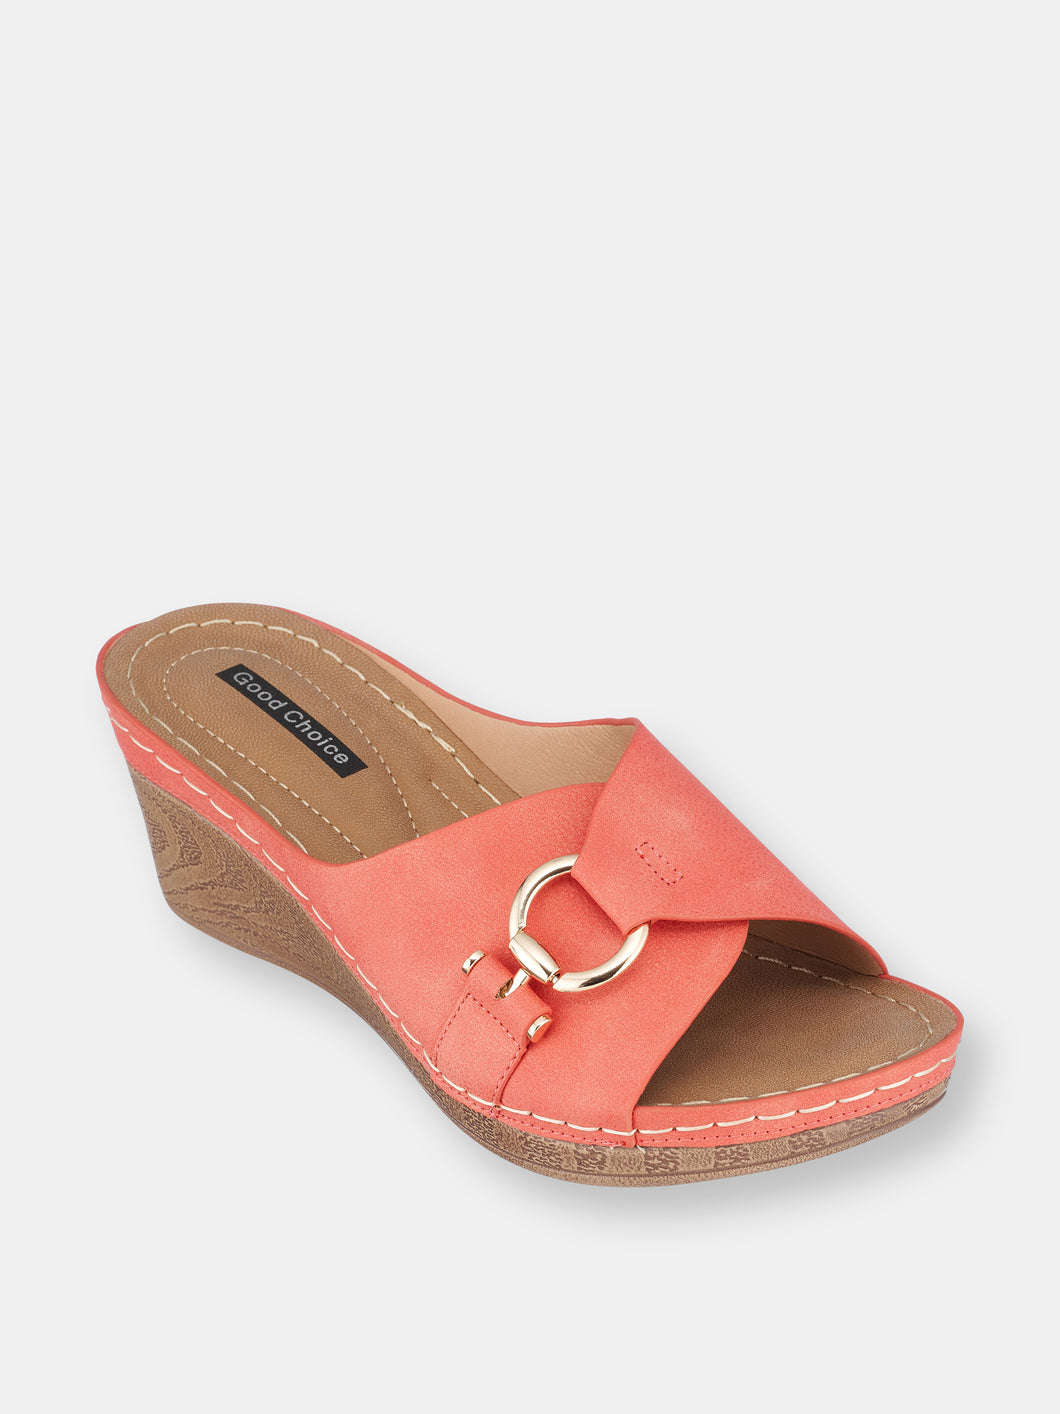 Bay Coral Wedge Sandals